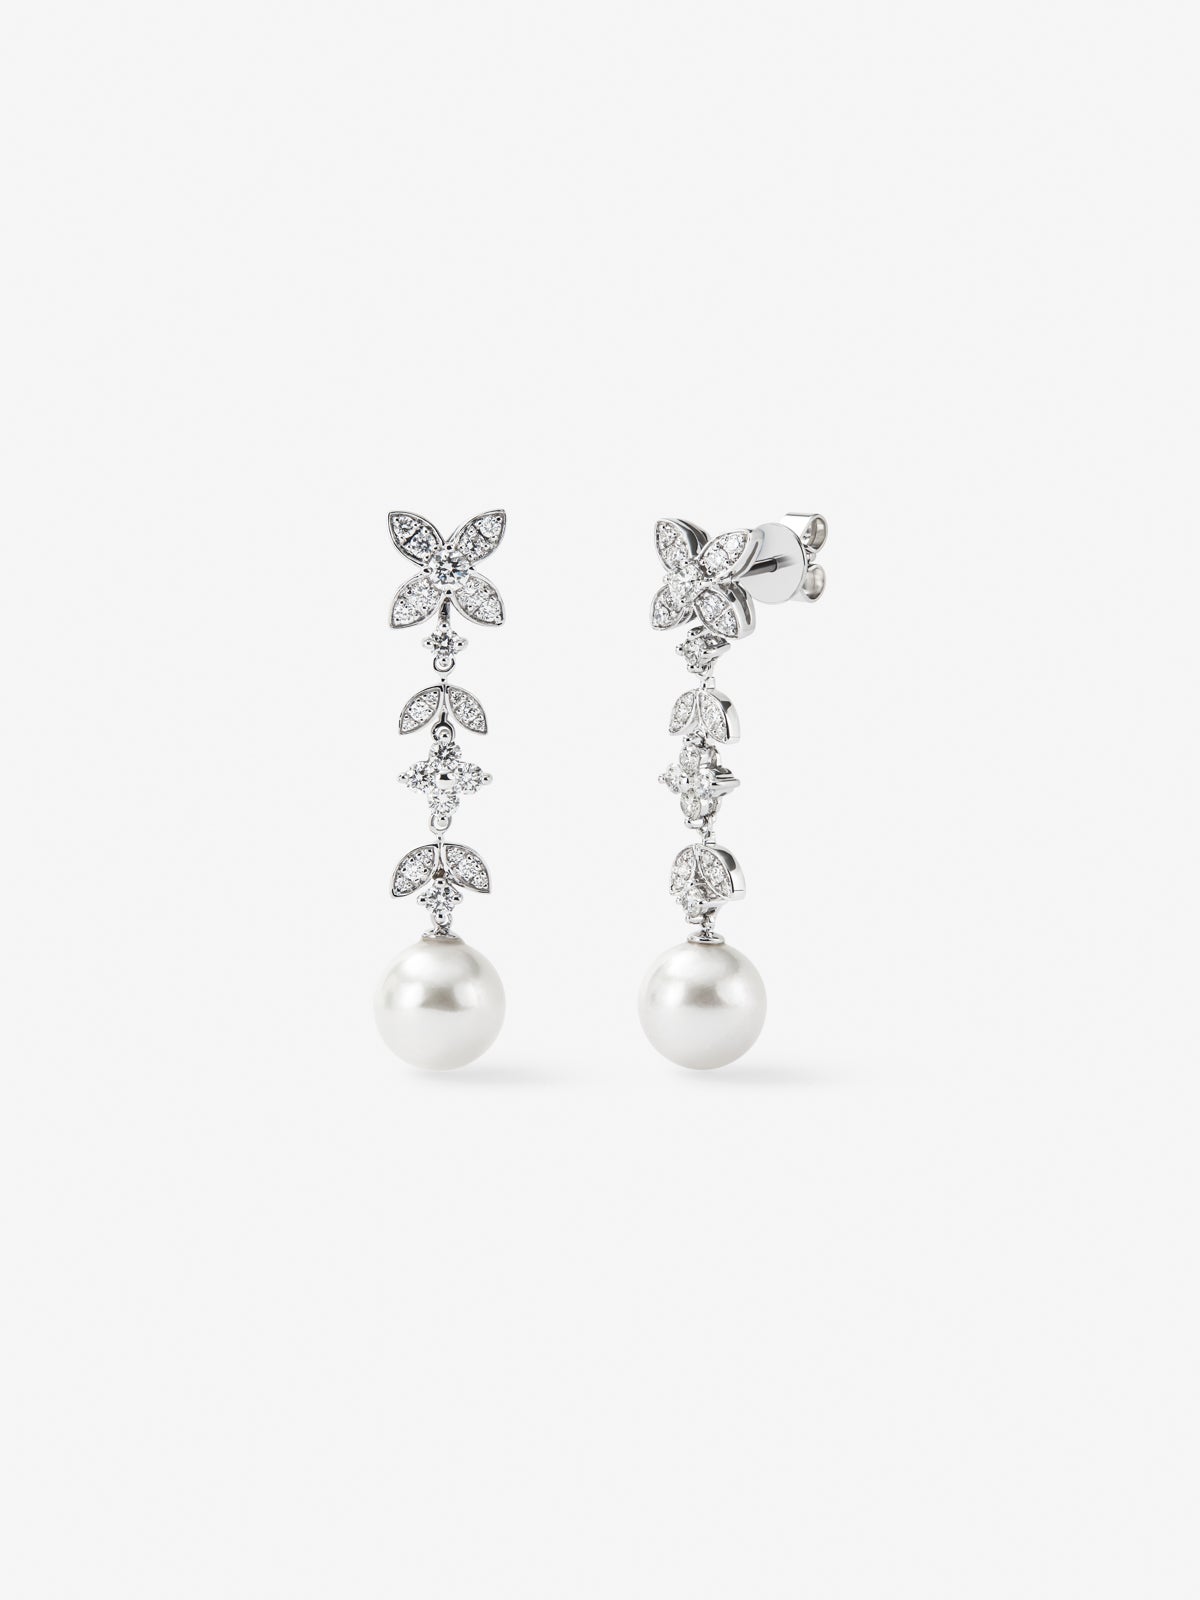 18K white gold earrings with 62 brilliant-cut diamonds with a total of 0.99 cts and 2 8.5 mm 2+ Akoya pearls